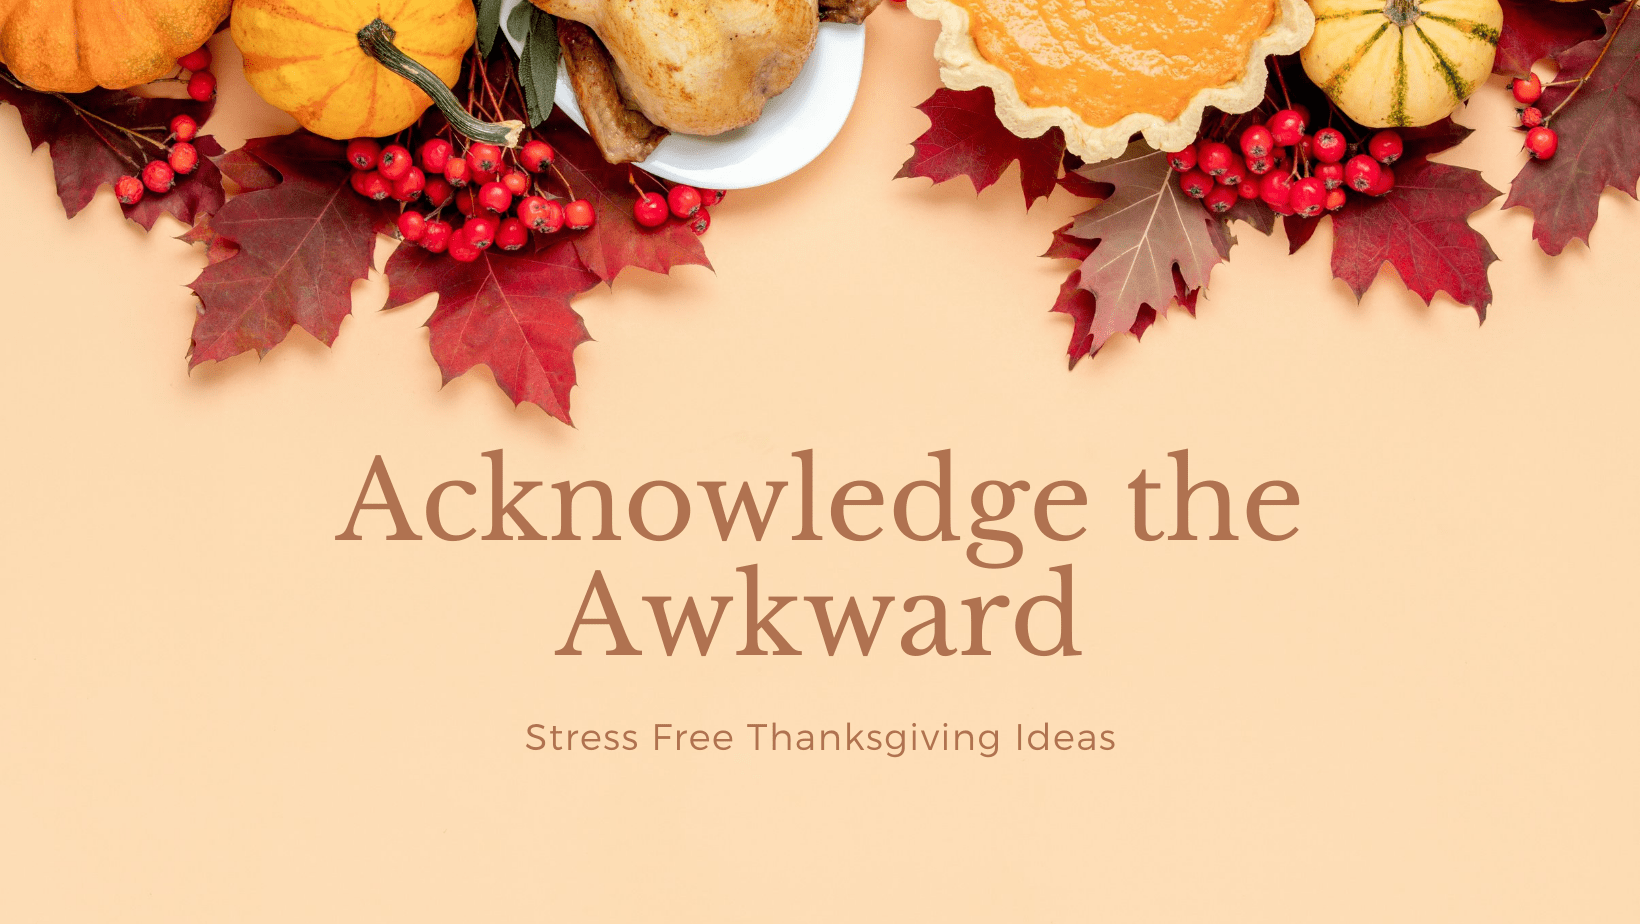 Acknowledge the awkward during Thanksgiving.